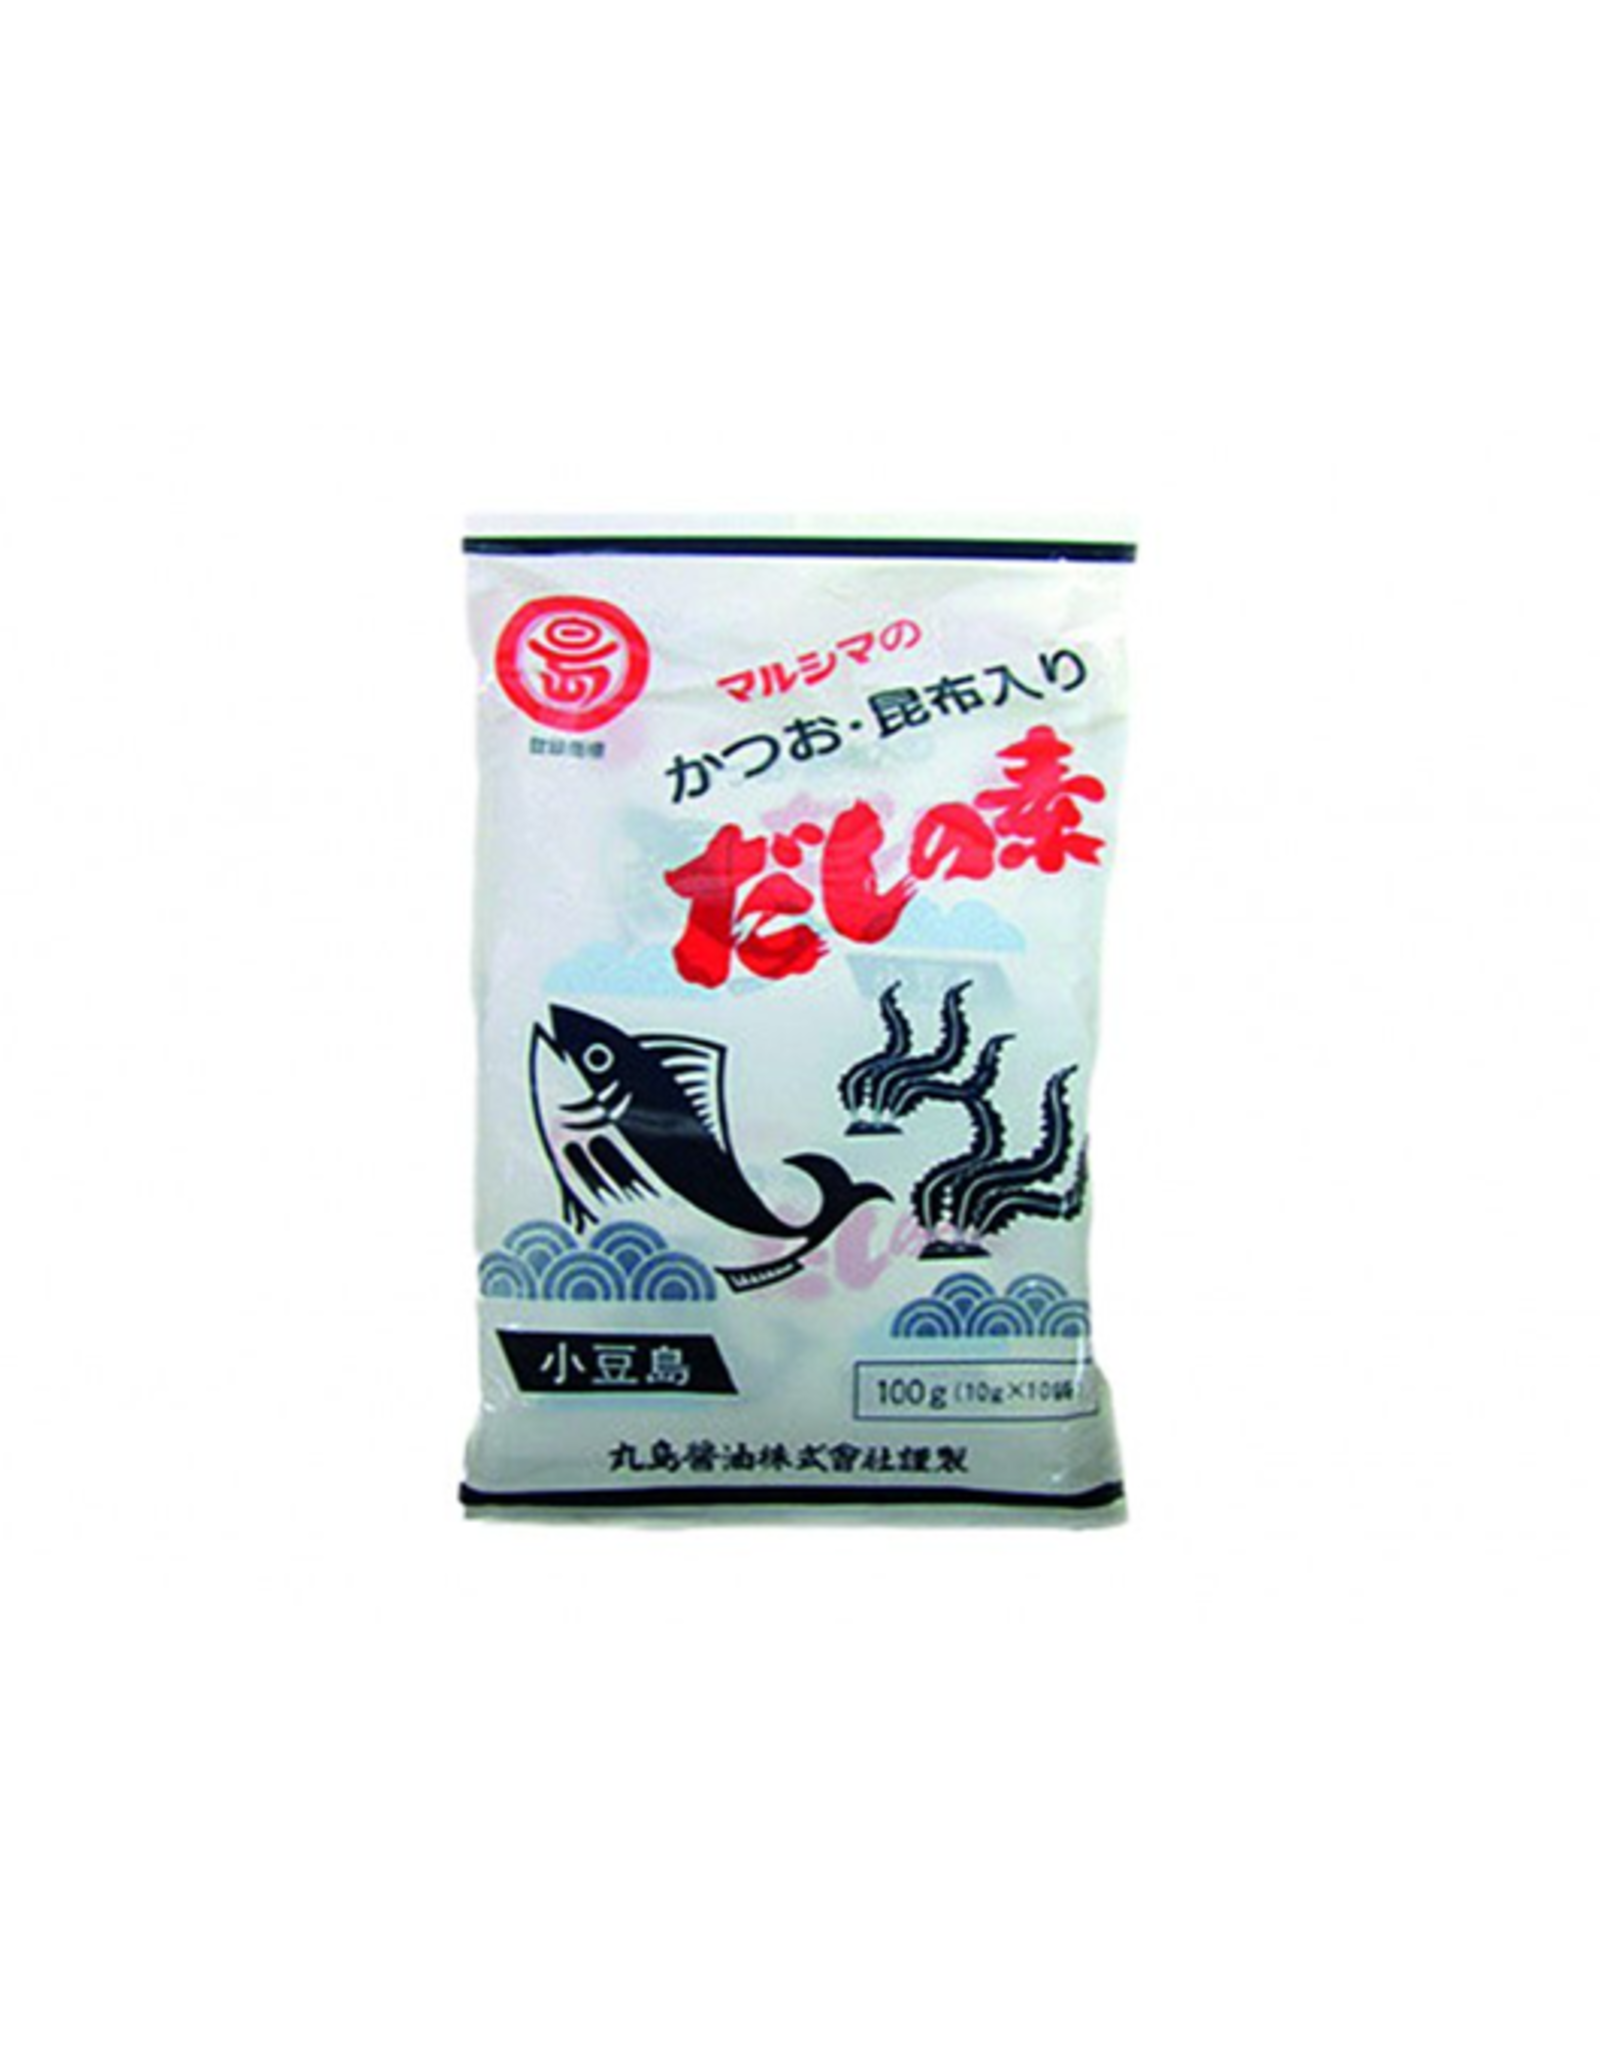 Marushima Seasoning for soups with Bonito fish flavour